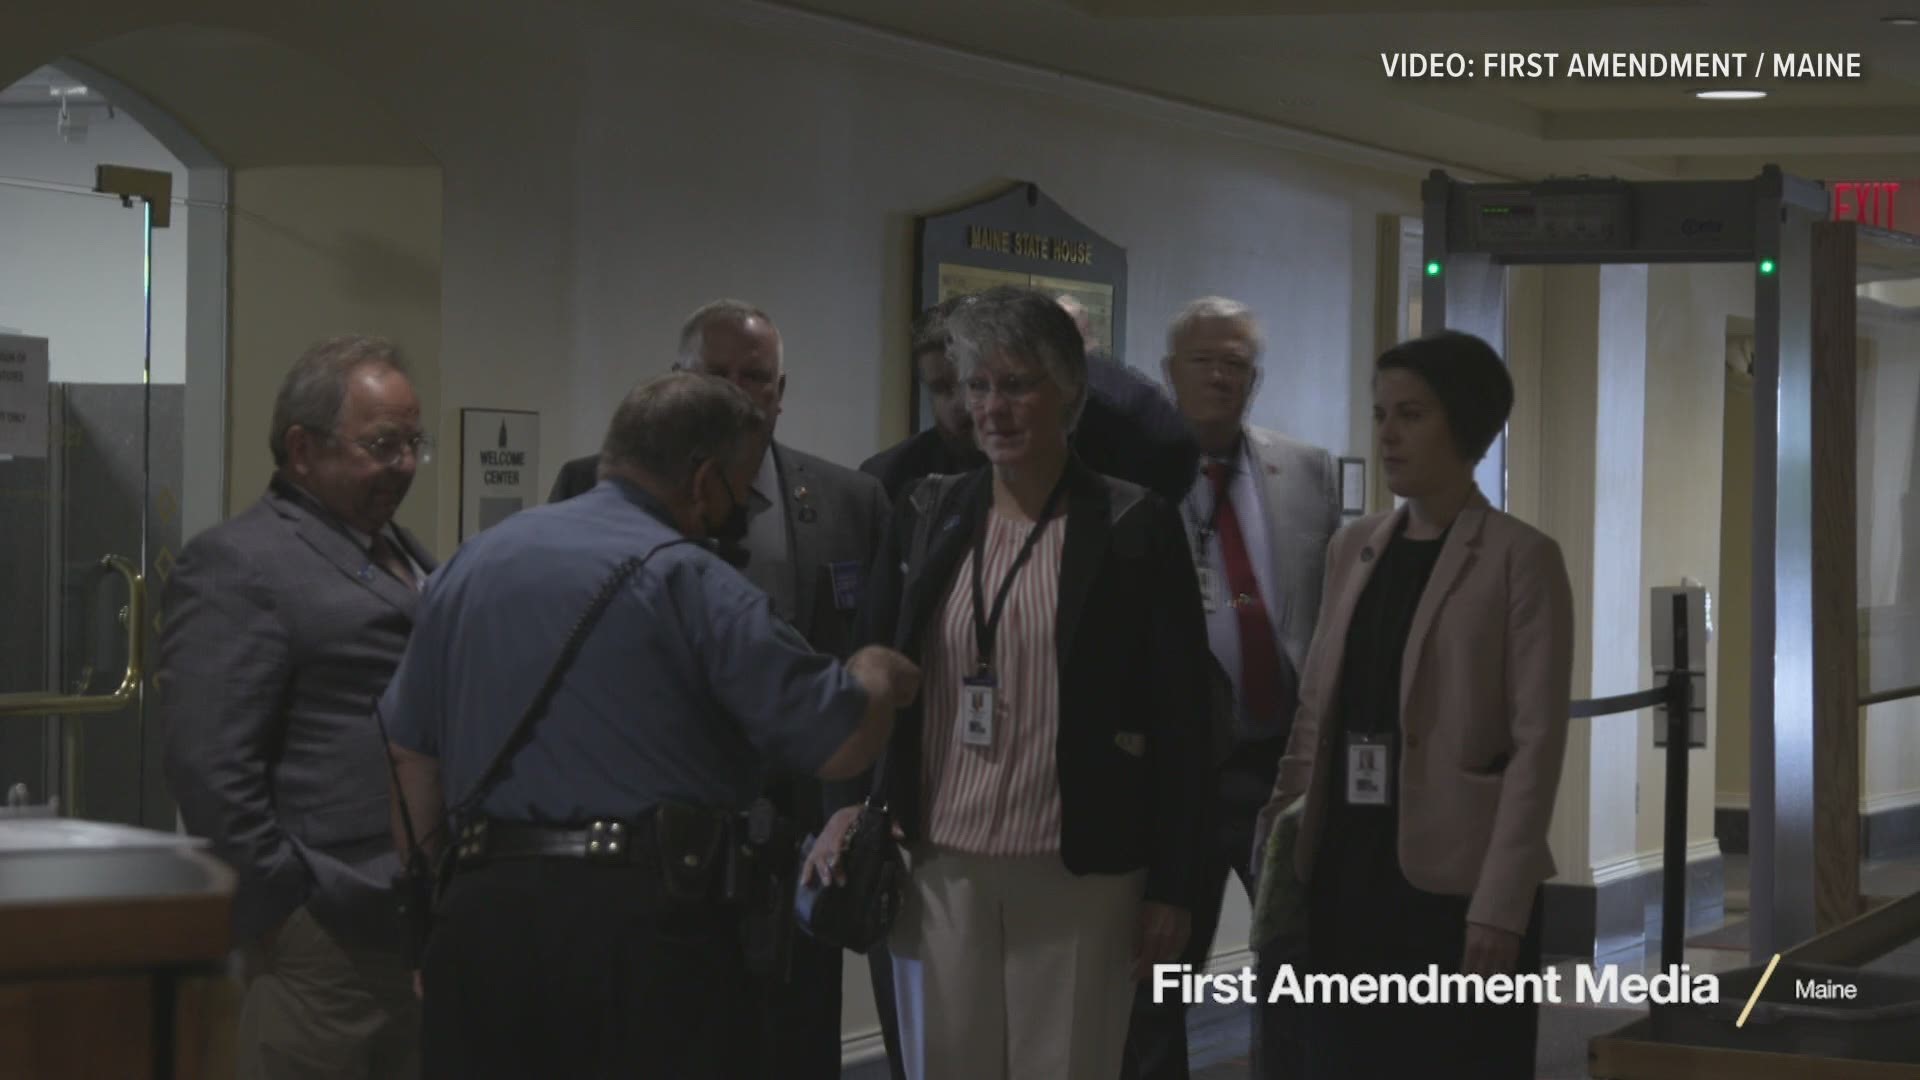 Seven state legislators were removed from their Legislative committee seats after they entered the State House without masks on.